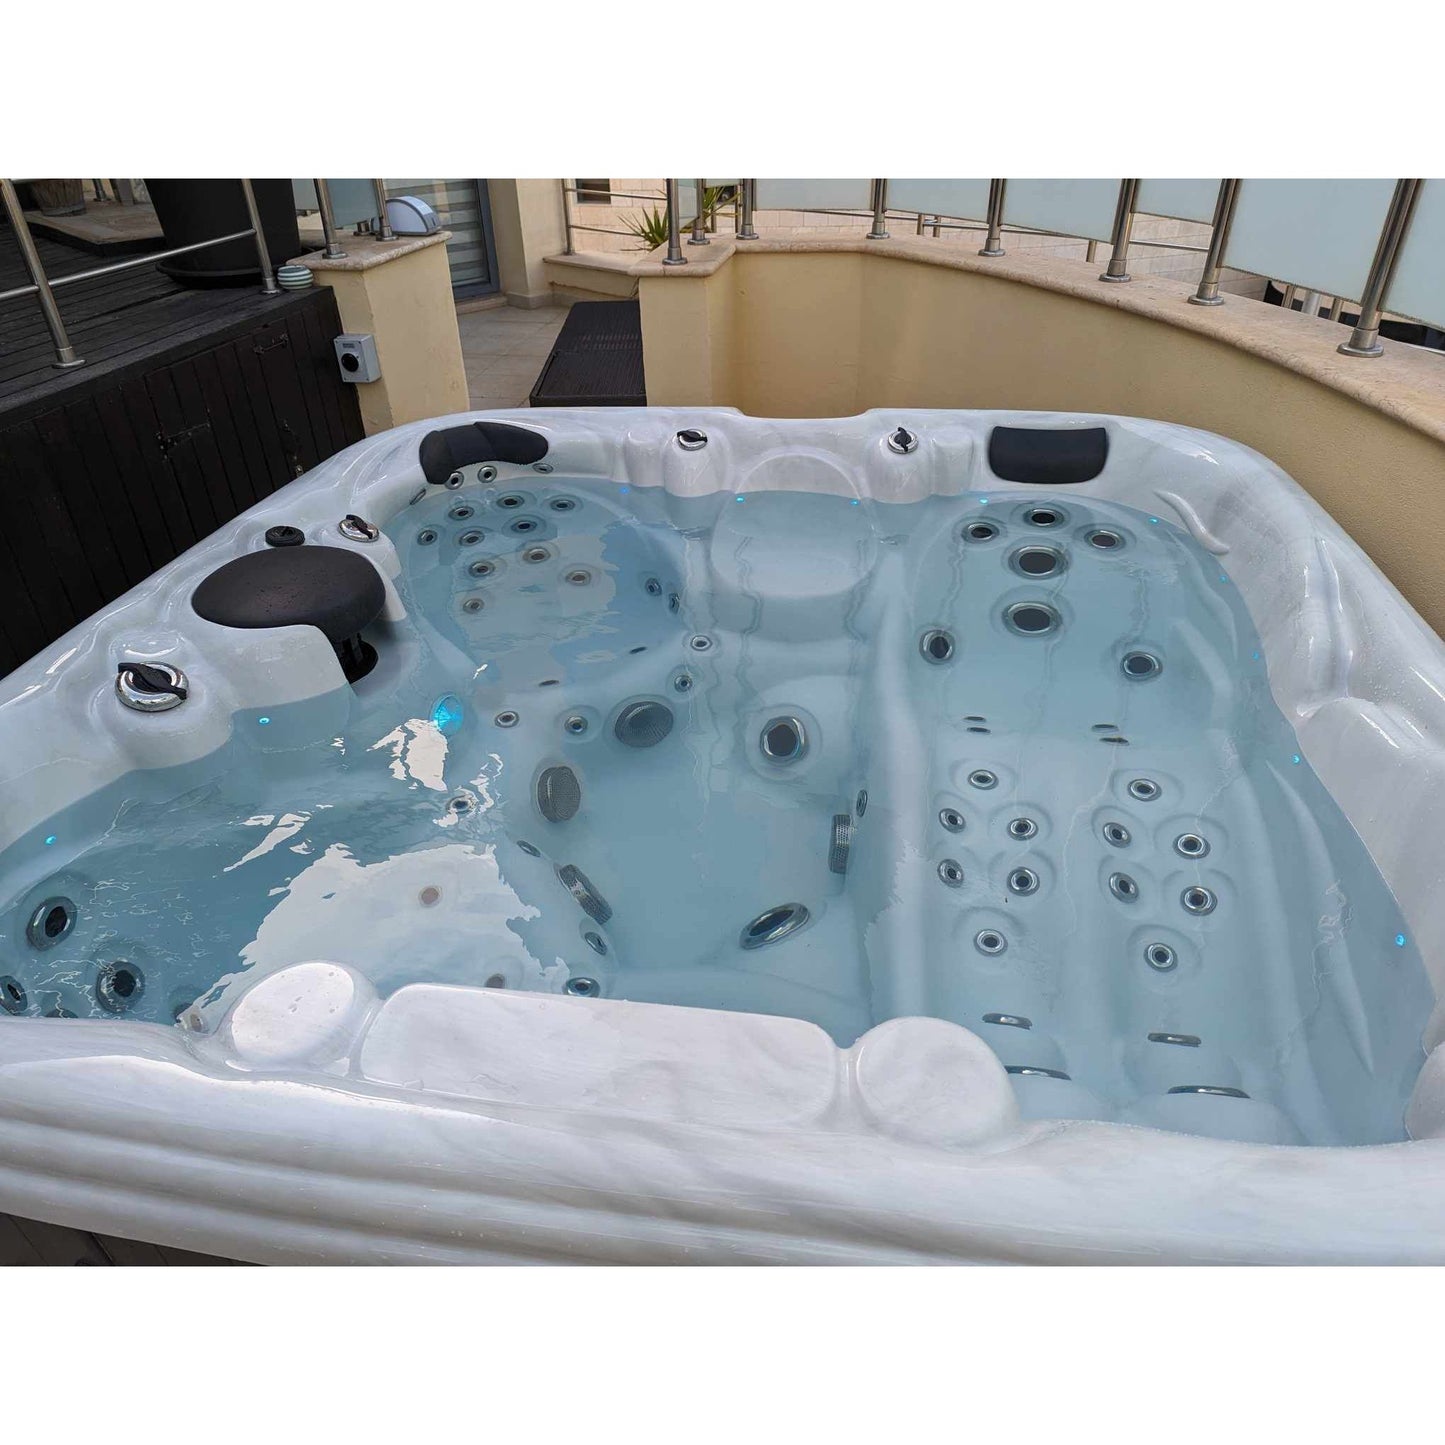 4 Person hot tub (1 Louger)